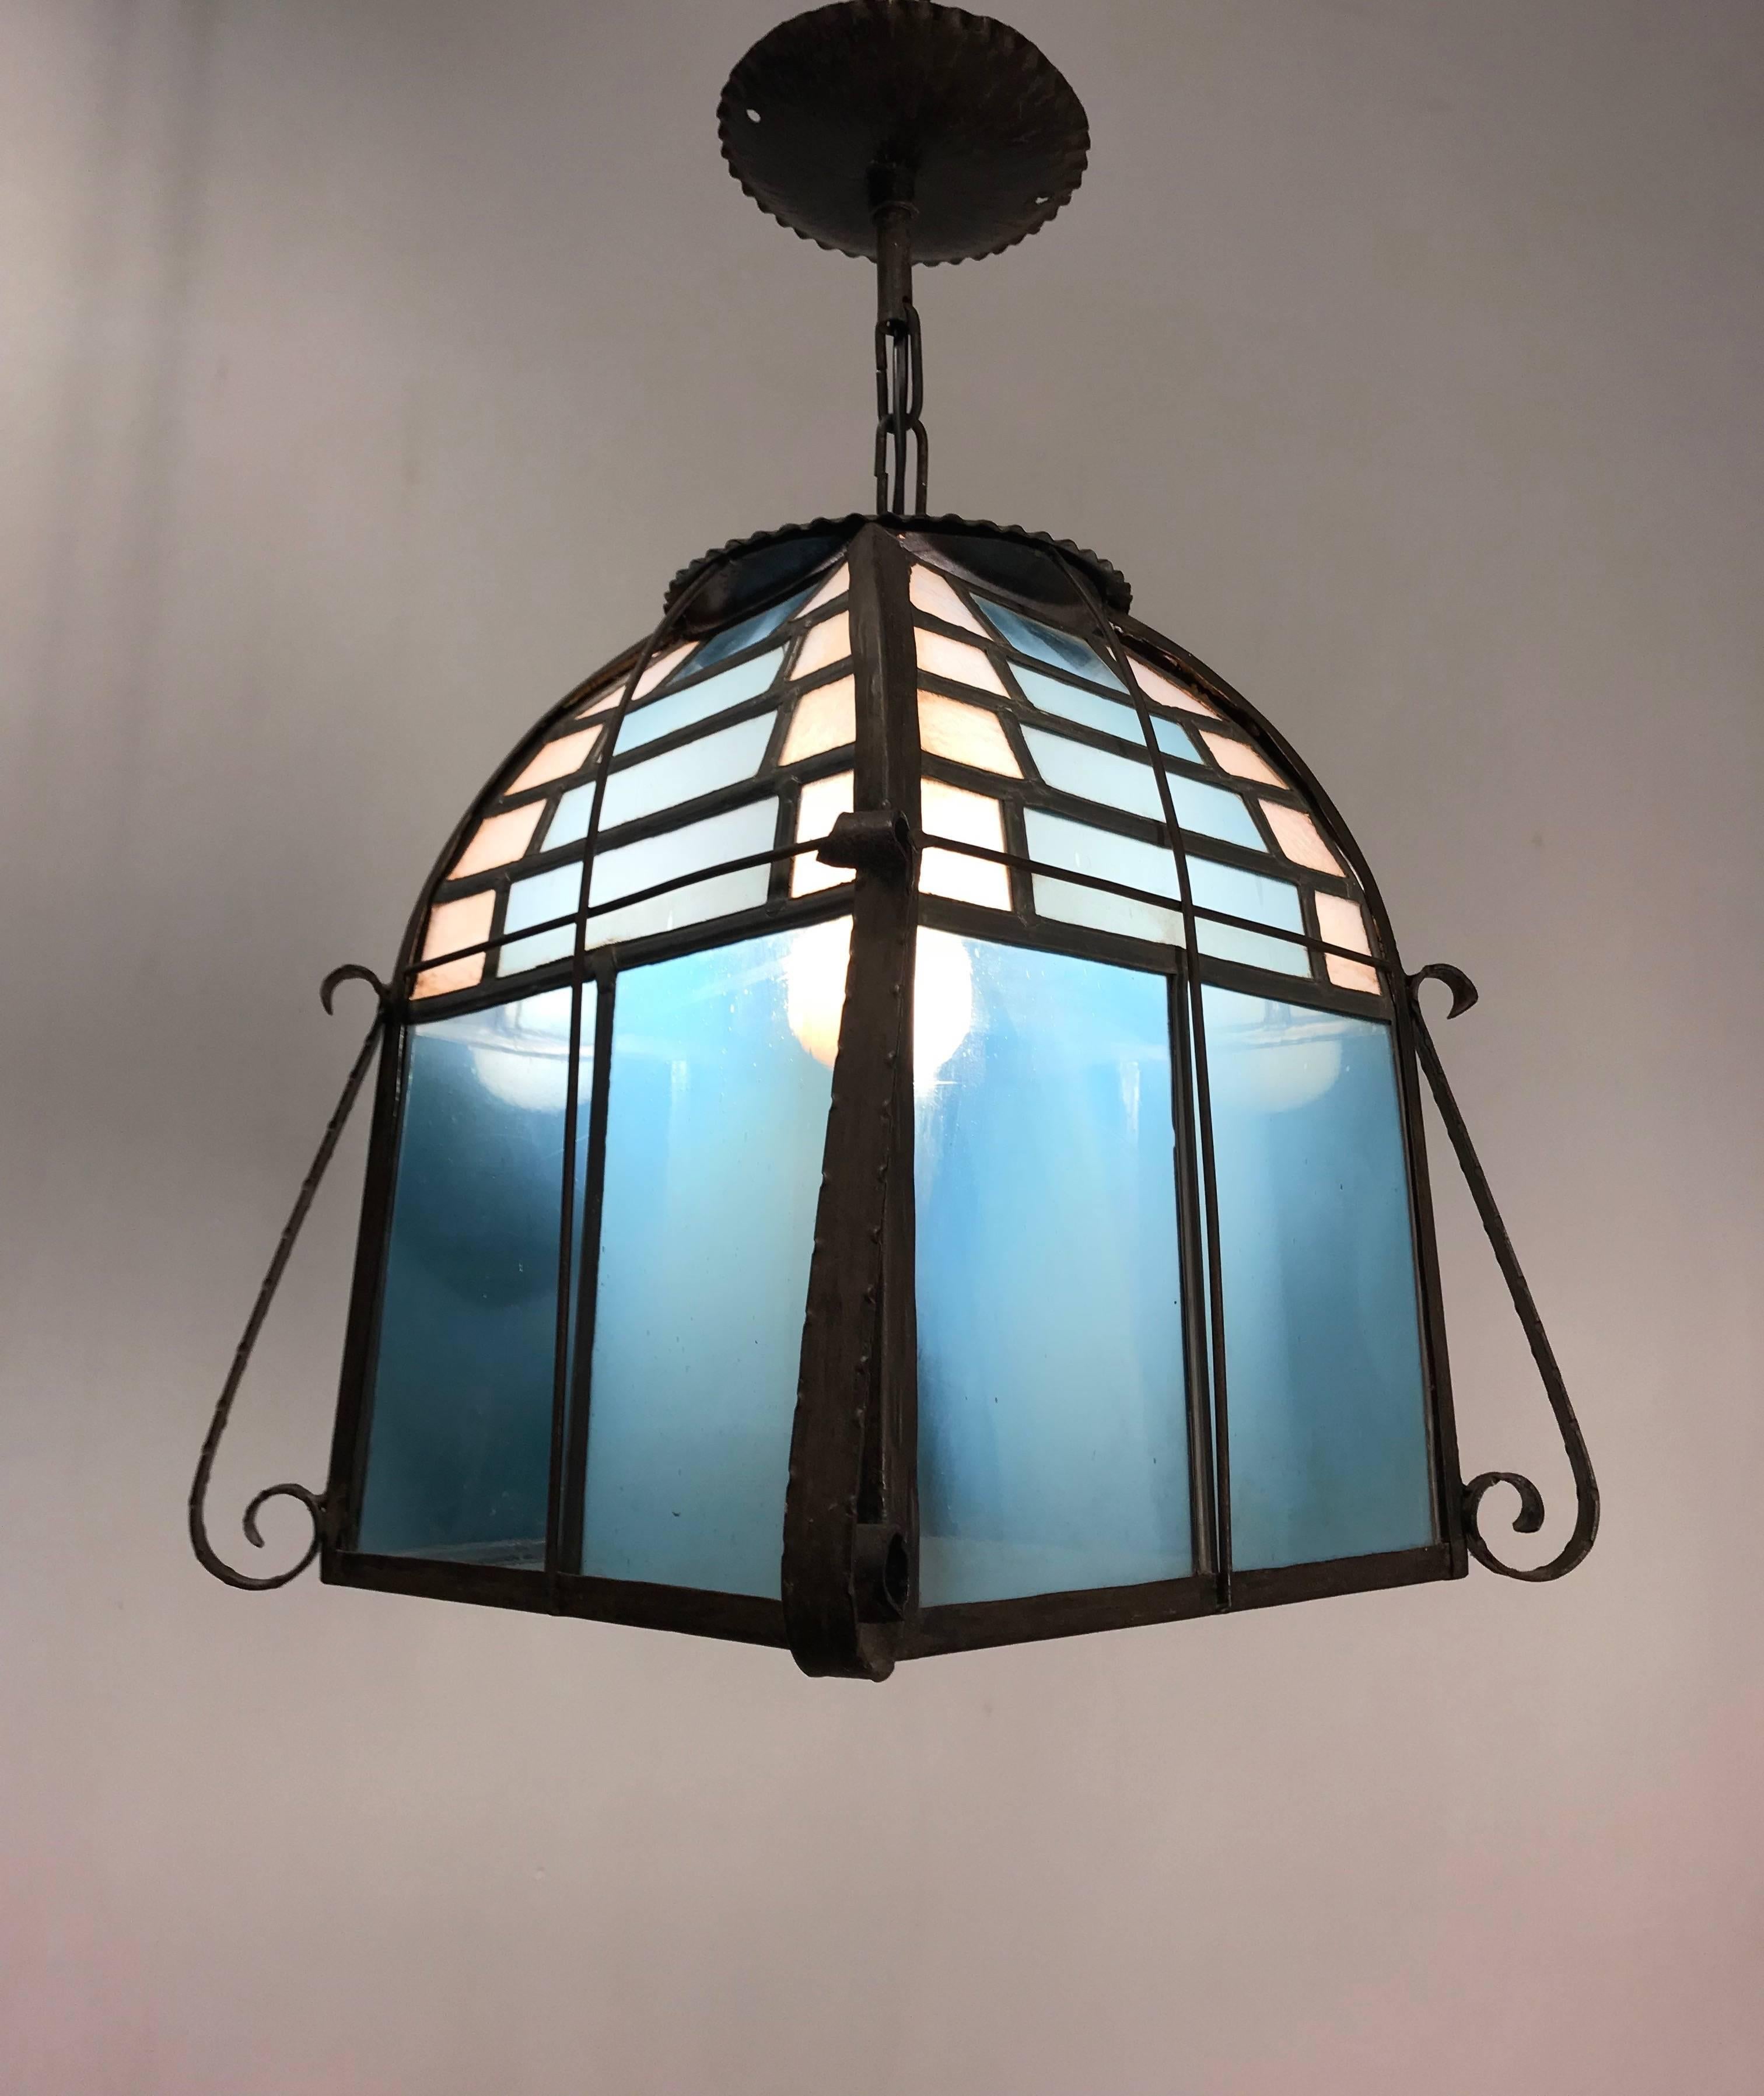 Hand-Crafted Rare All Handcrafted Stain Leaded Arts & Crafts Great Blue Glass Pendant Light